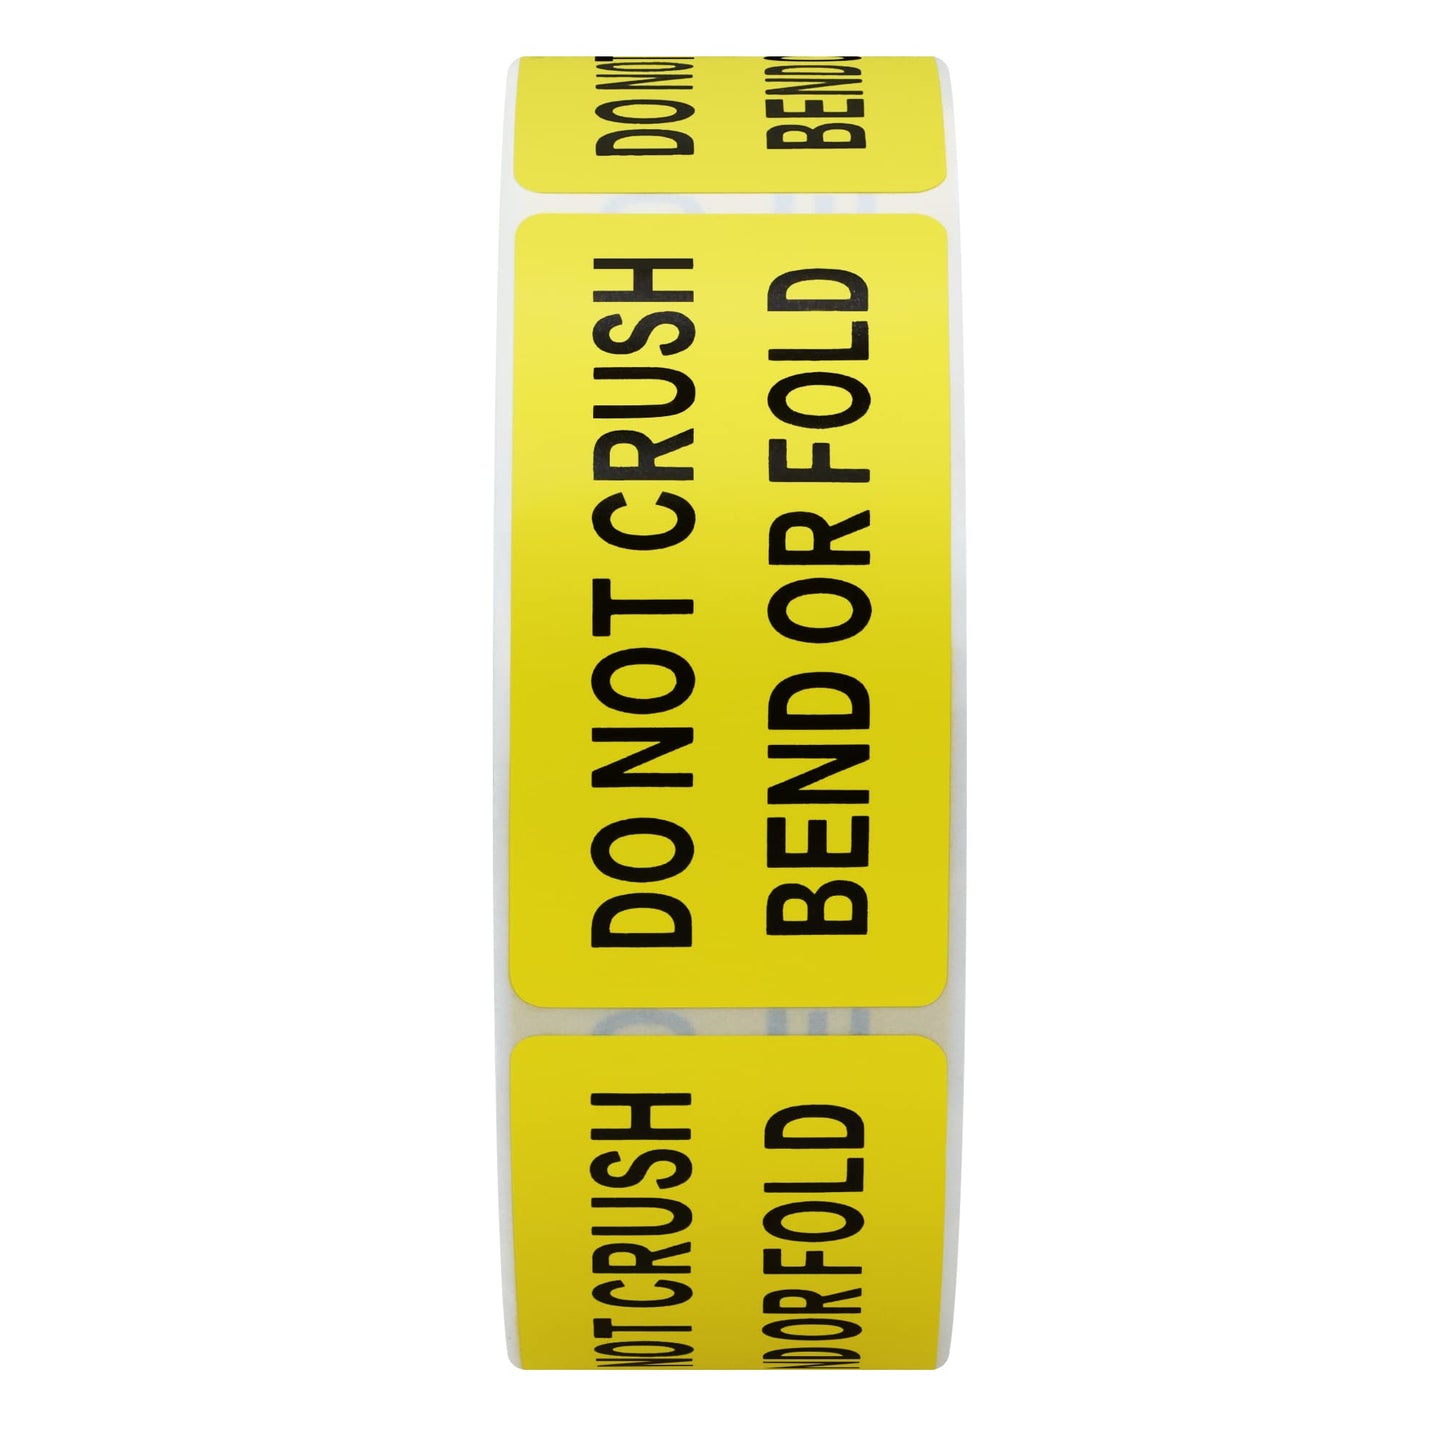 Hybsk 1x2 inch DO NOT Crush Bend OR FOLD Warning Shipping Stickers Self Adhesive Labels